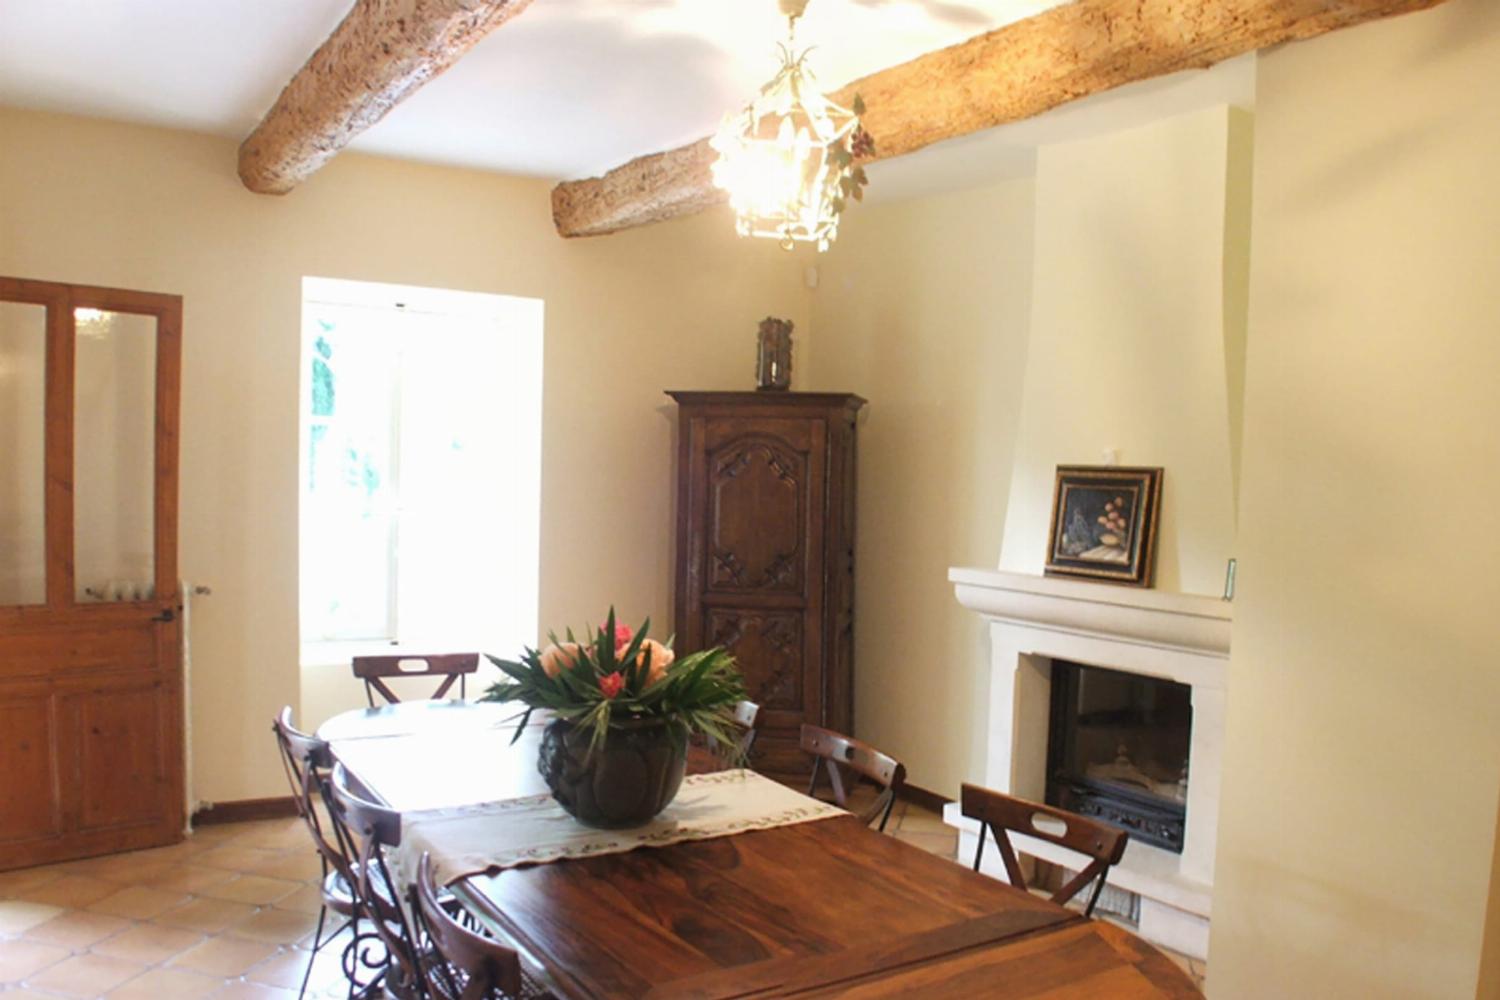 Dining room | Self-catering accommodation in Vaucluse